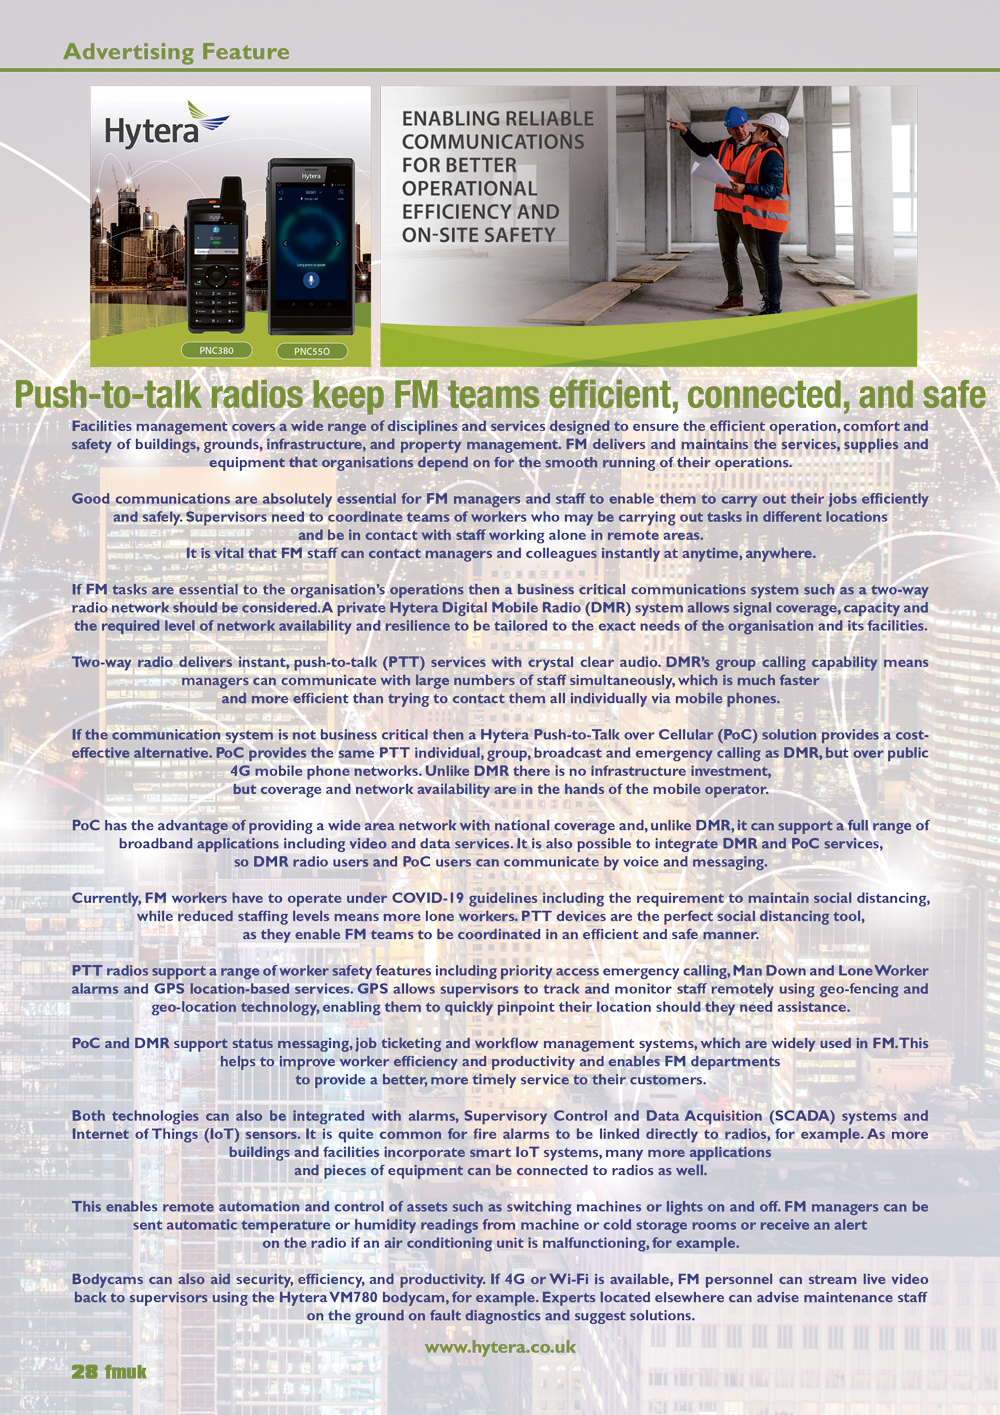 Push-To-Talk Radios Keep FM Teams Efficient, Connected, And Safe